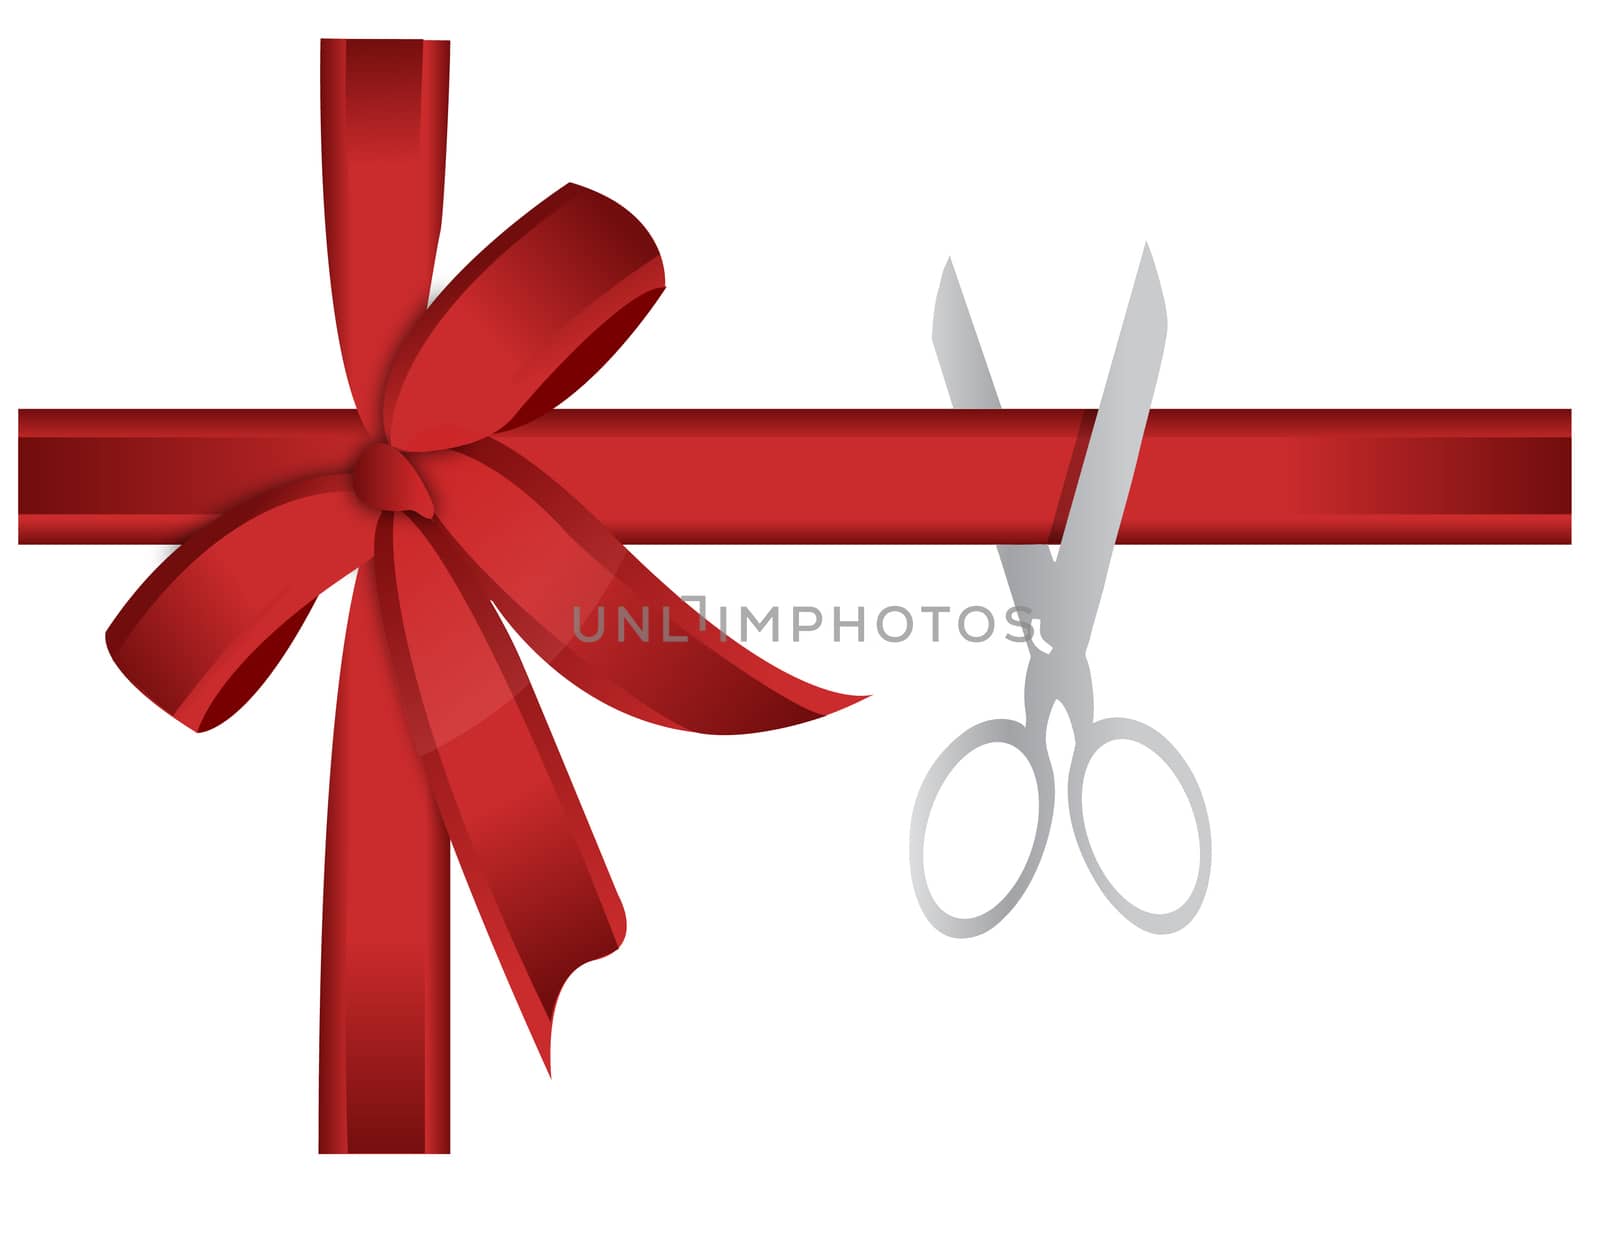 scissors cutting red ribbon illustration concept by alexmillos